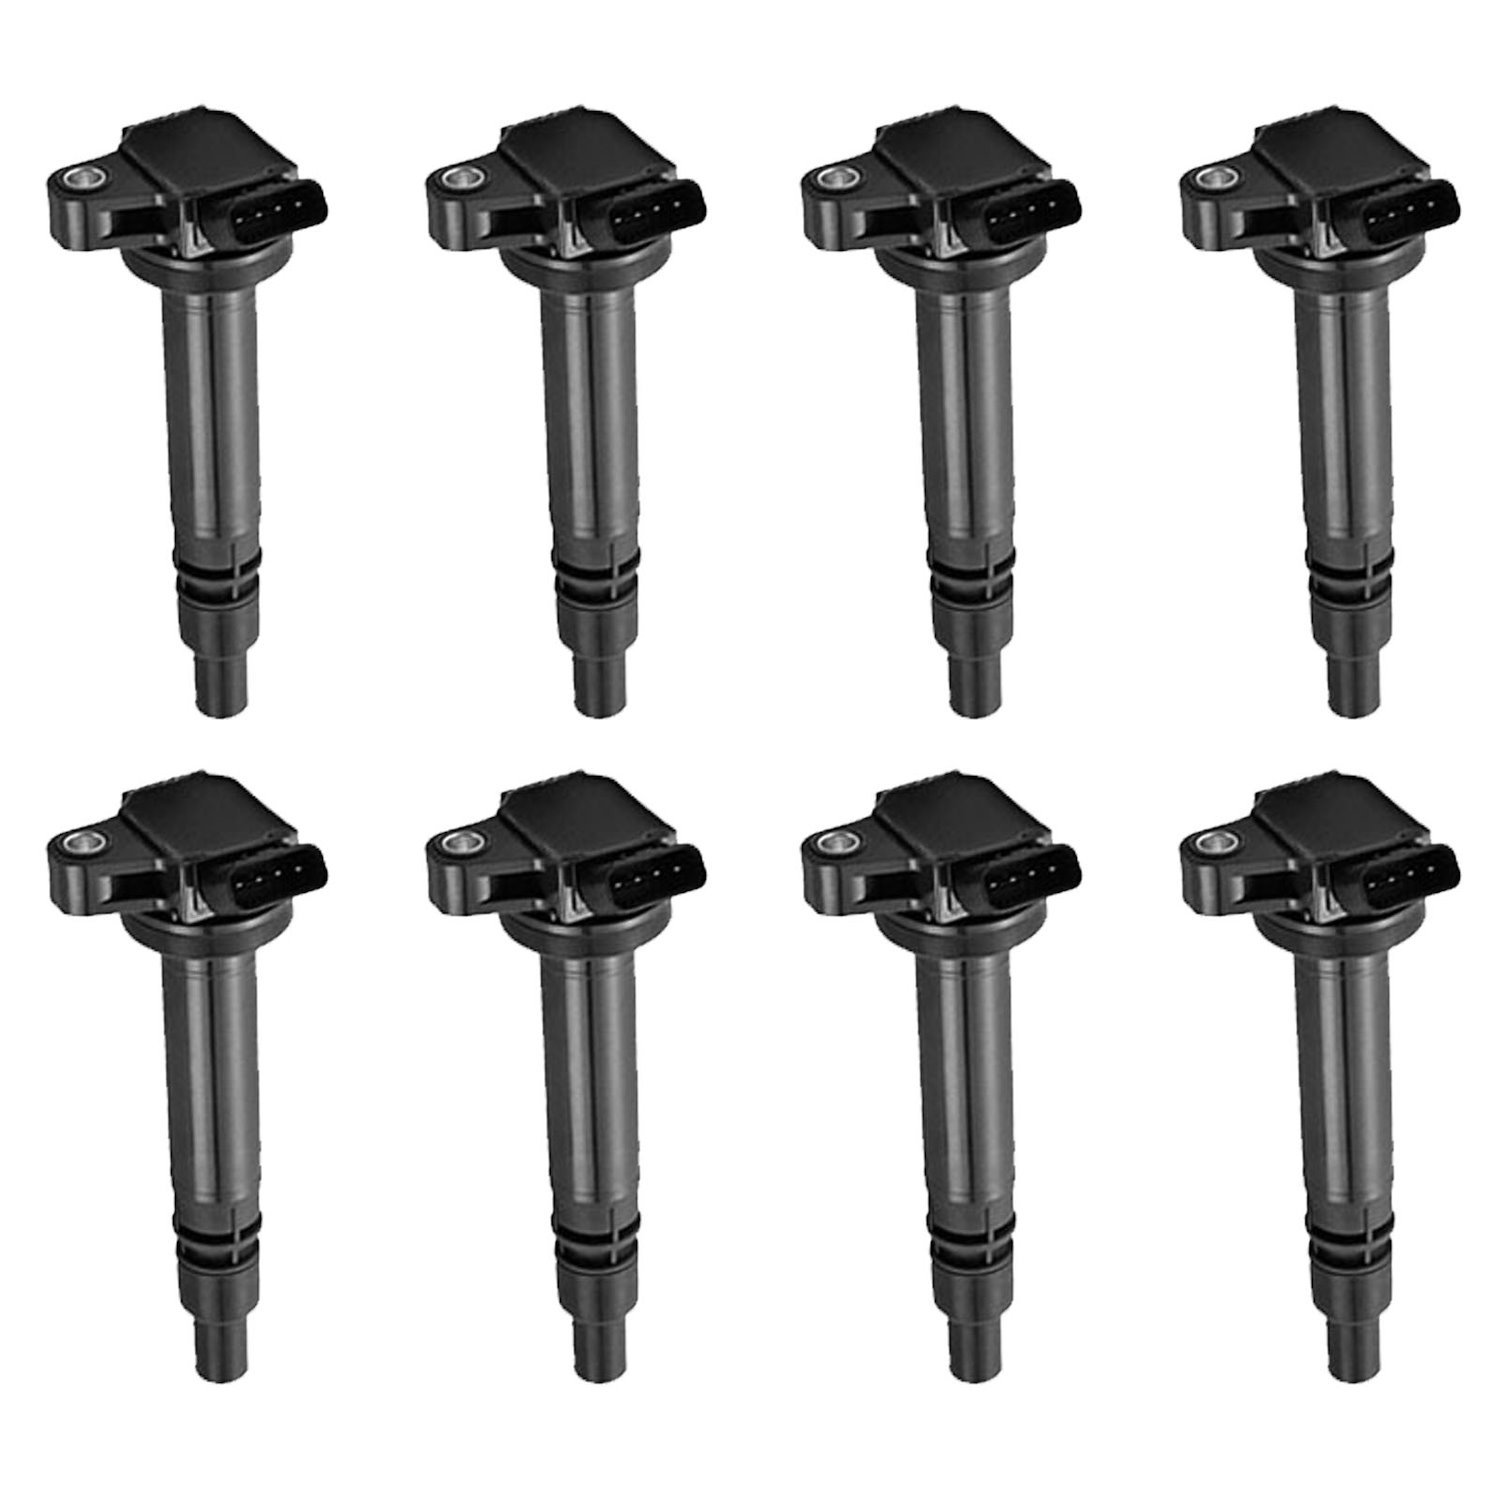 OE Replacement Ignition Coils for 2008-2011 Lexus GS460 4.6L V8